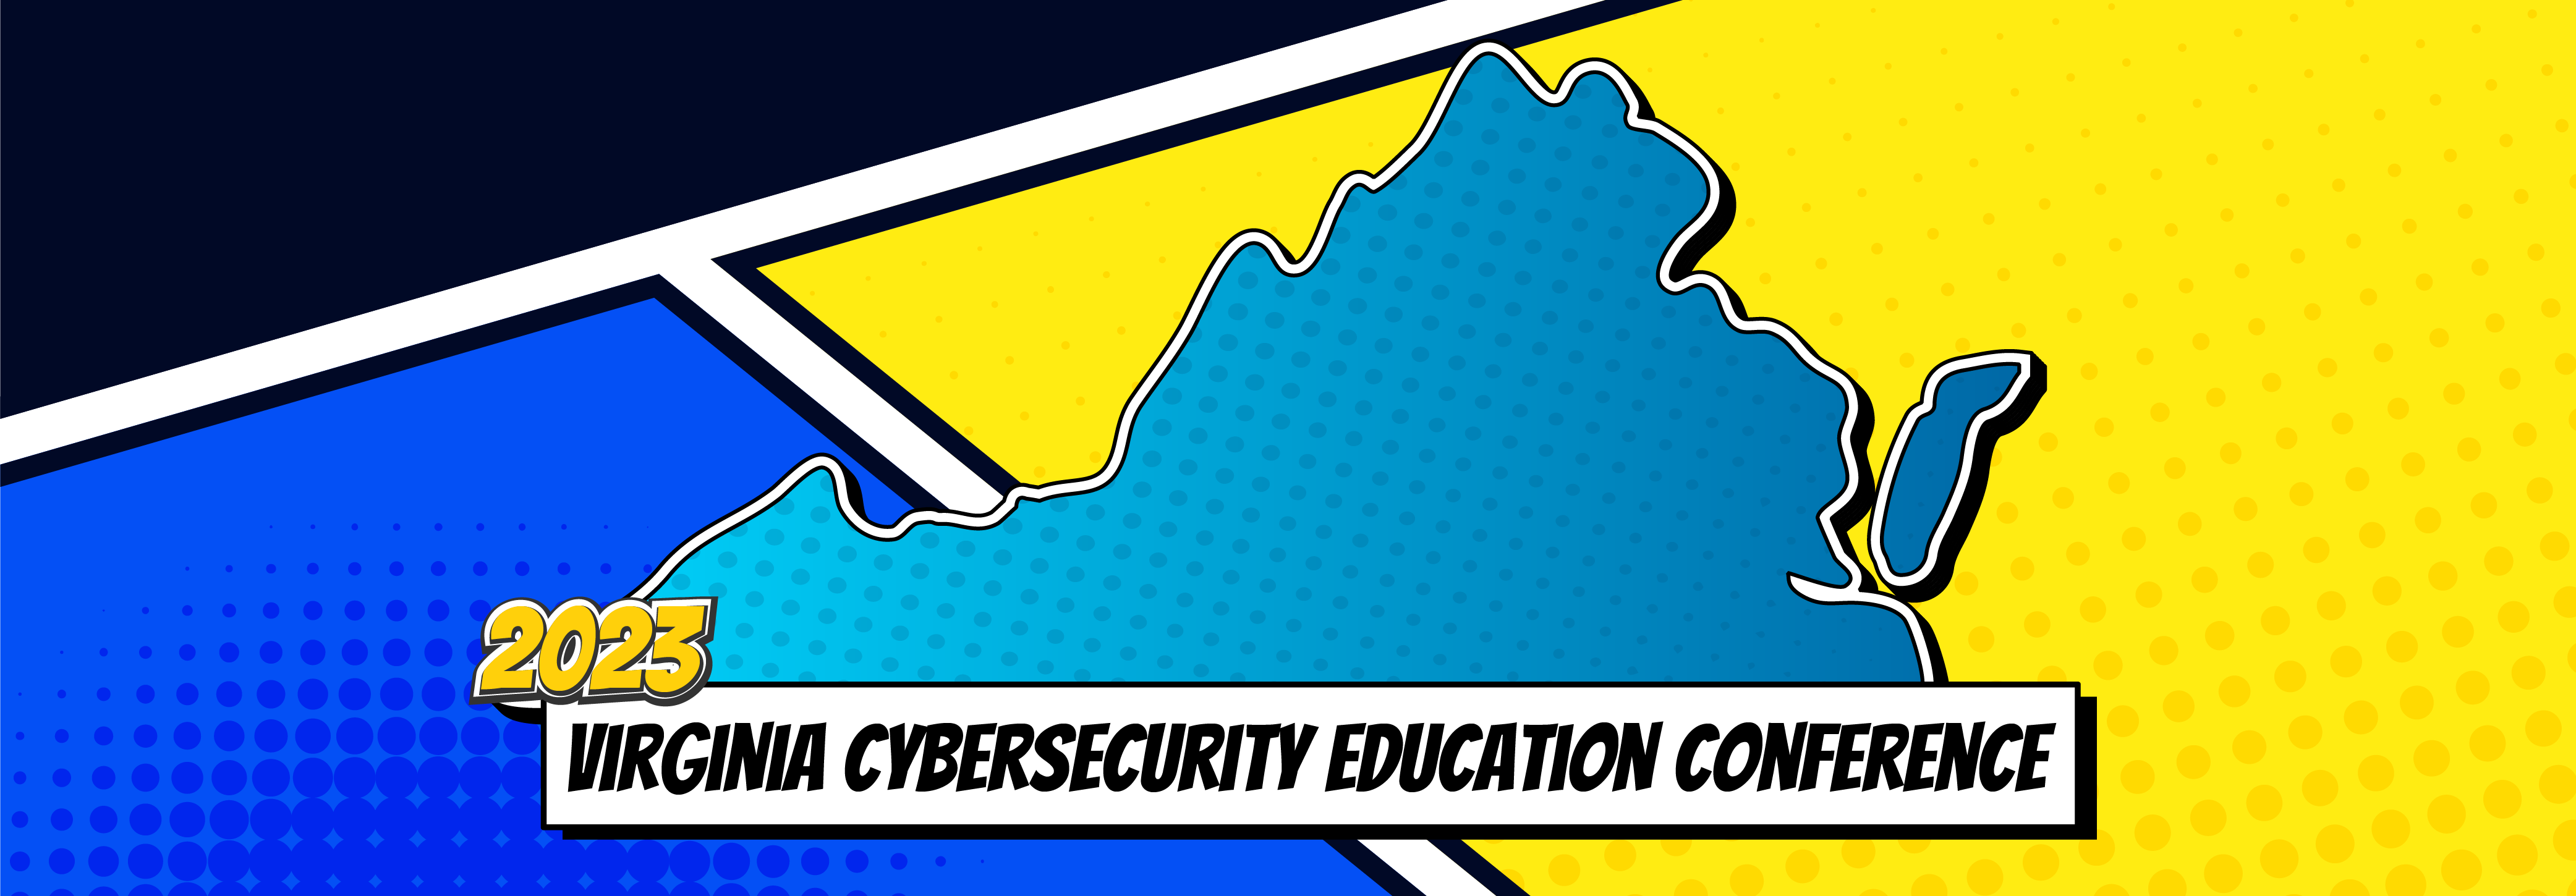 2023 Virginia Cybersecurity Education Conference